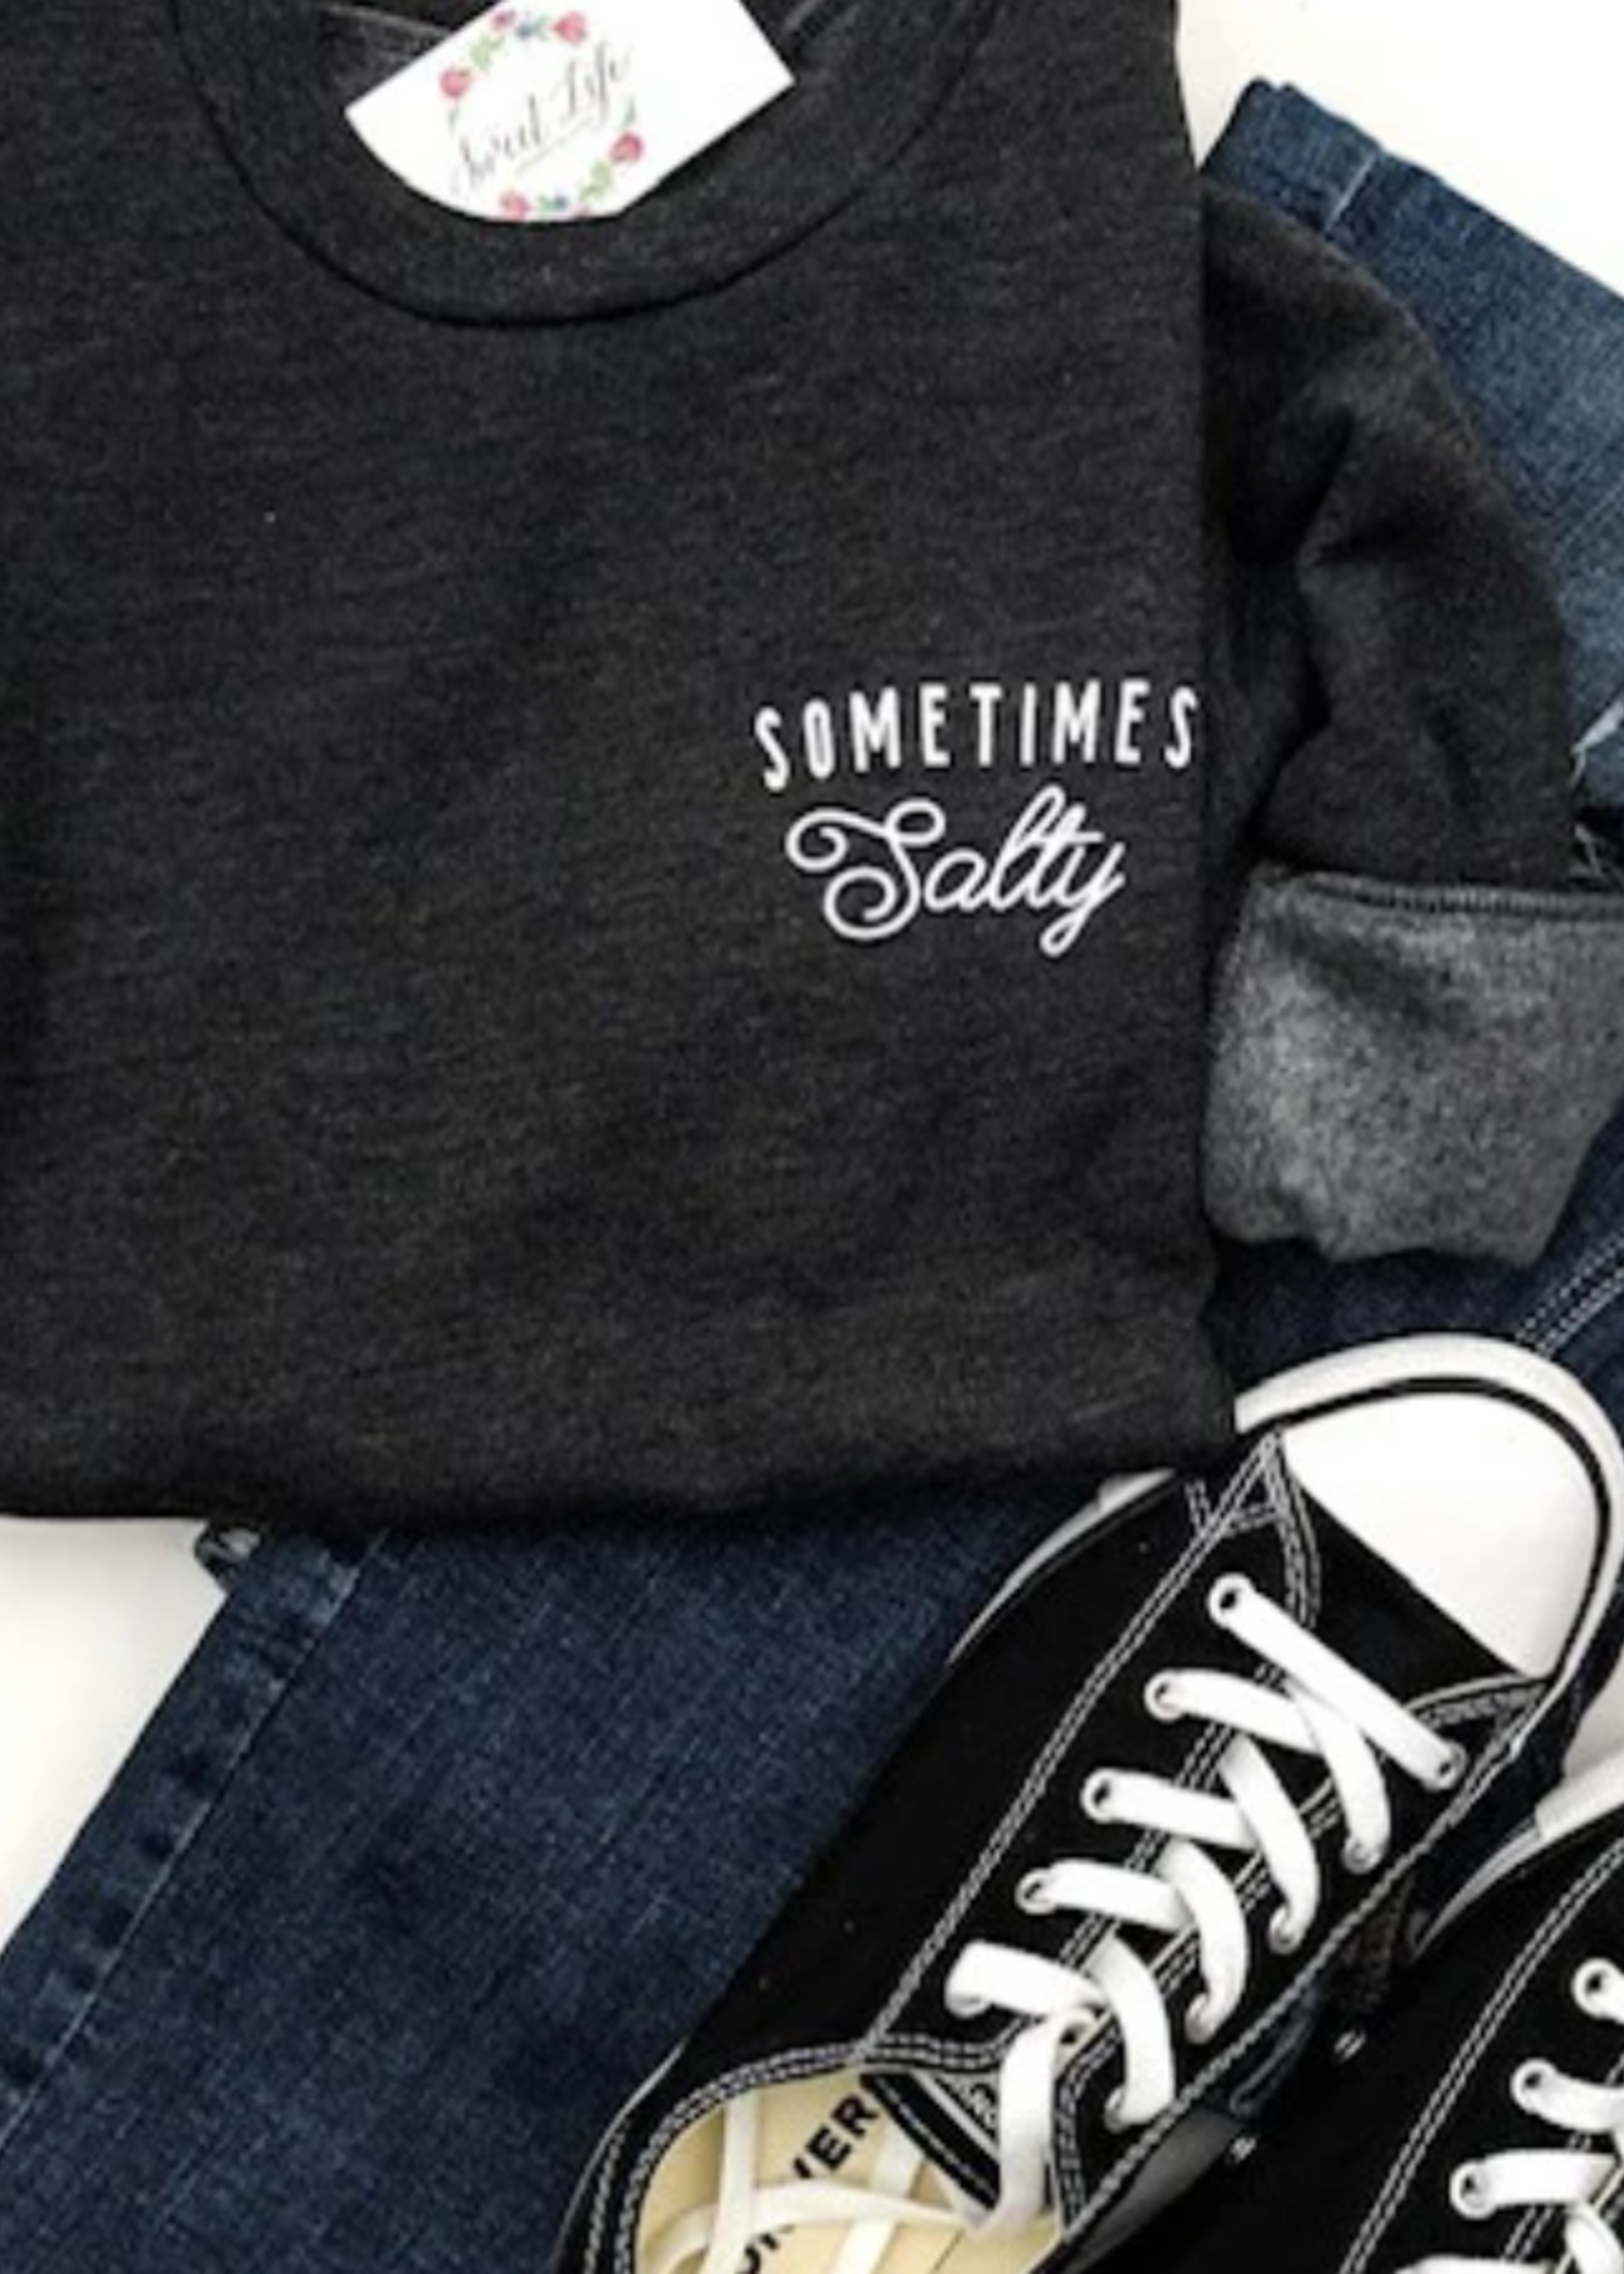 The Sweet Life Apparel & Gifts Sometimes Salty Crew